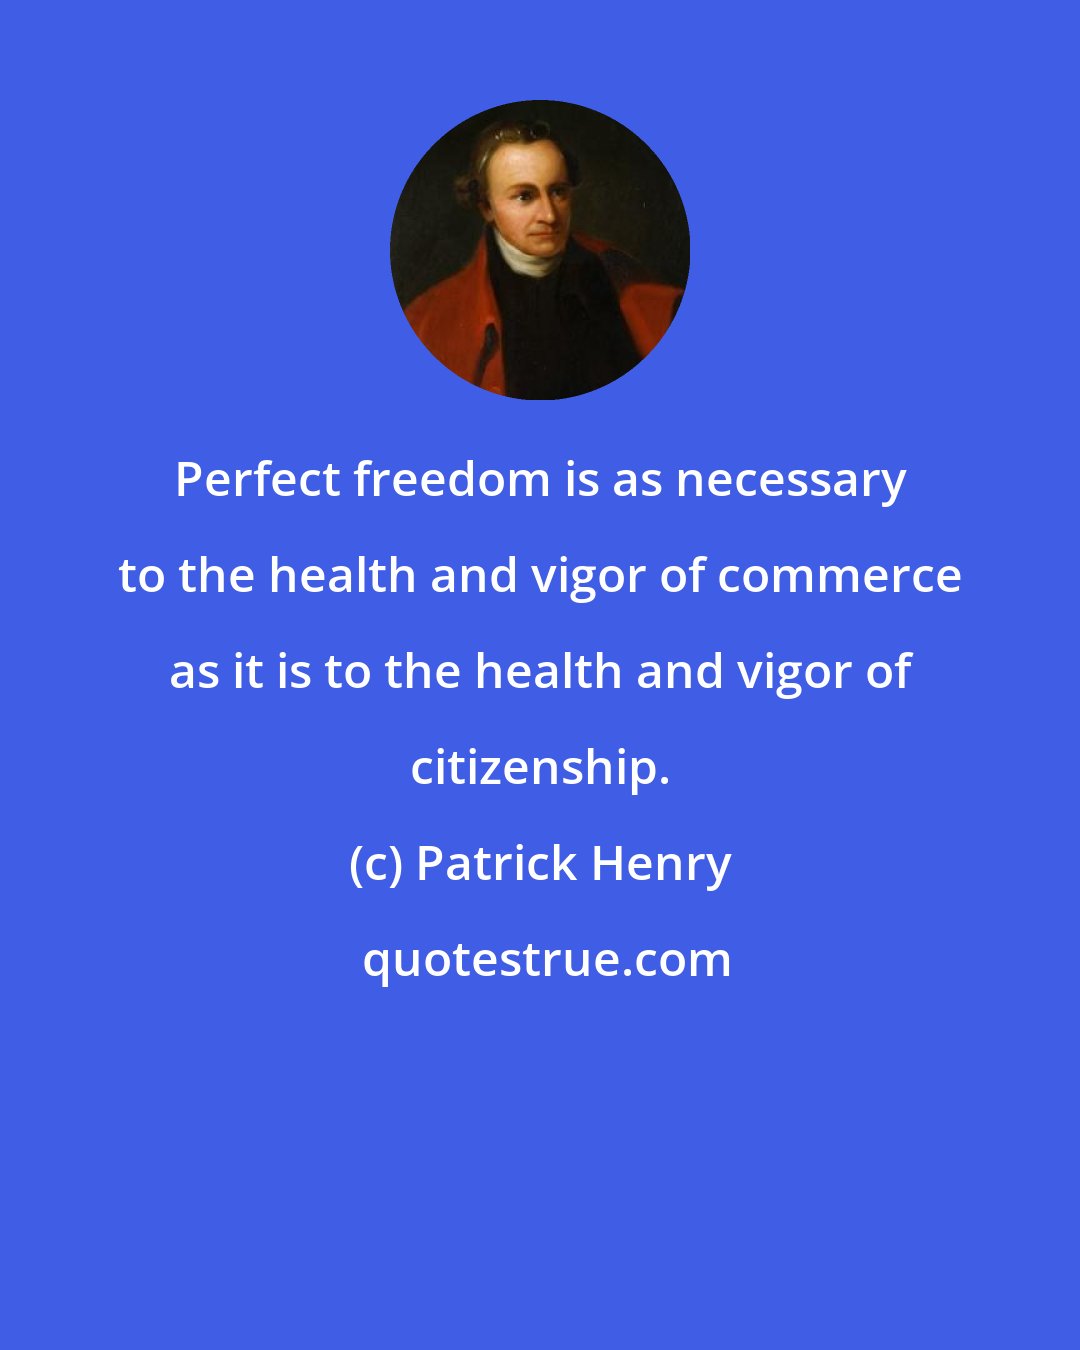 Patrick Henry: Perfect freedom is as necessary to the health and vigor of commerce as it is to the health and vigor of citizenship.